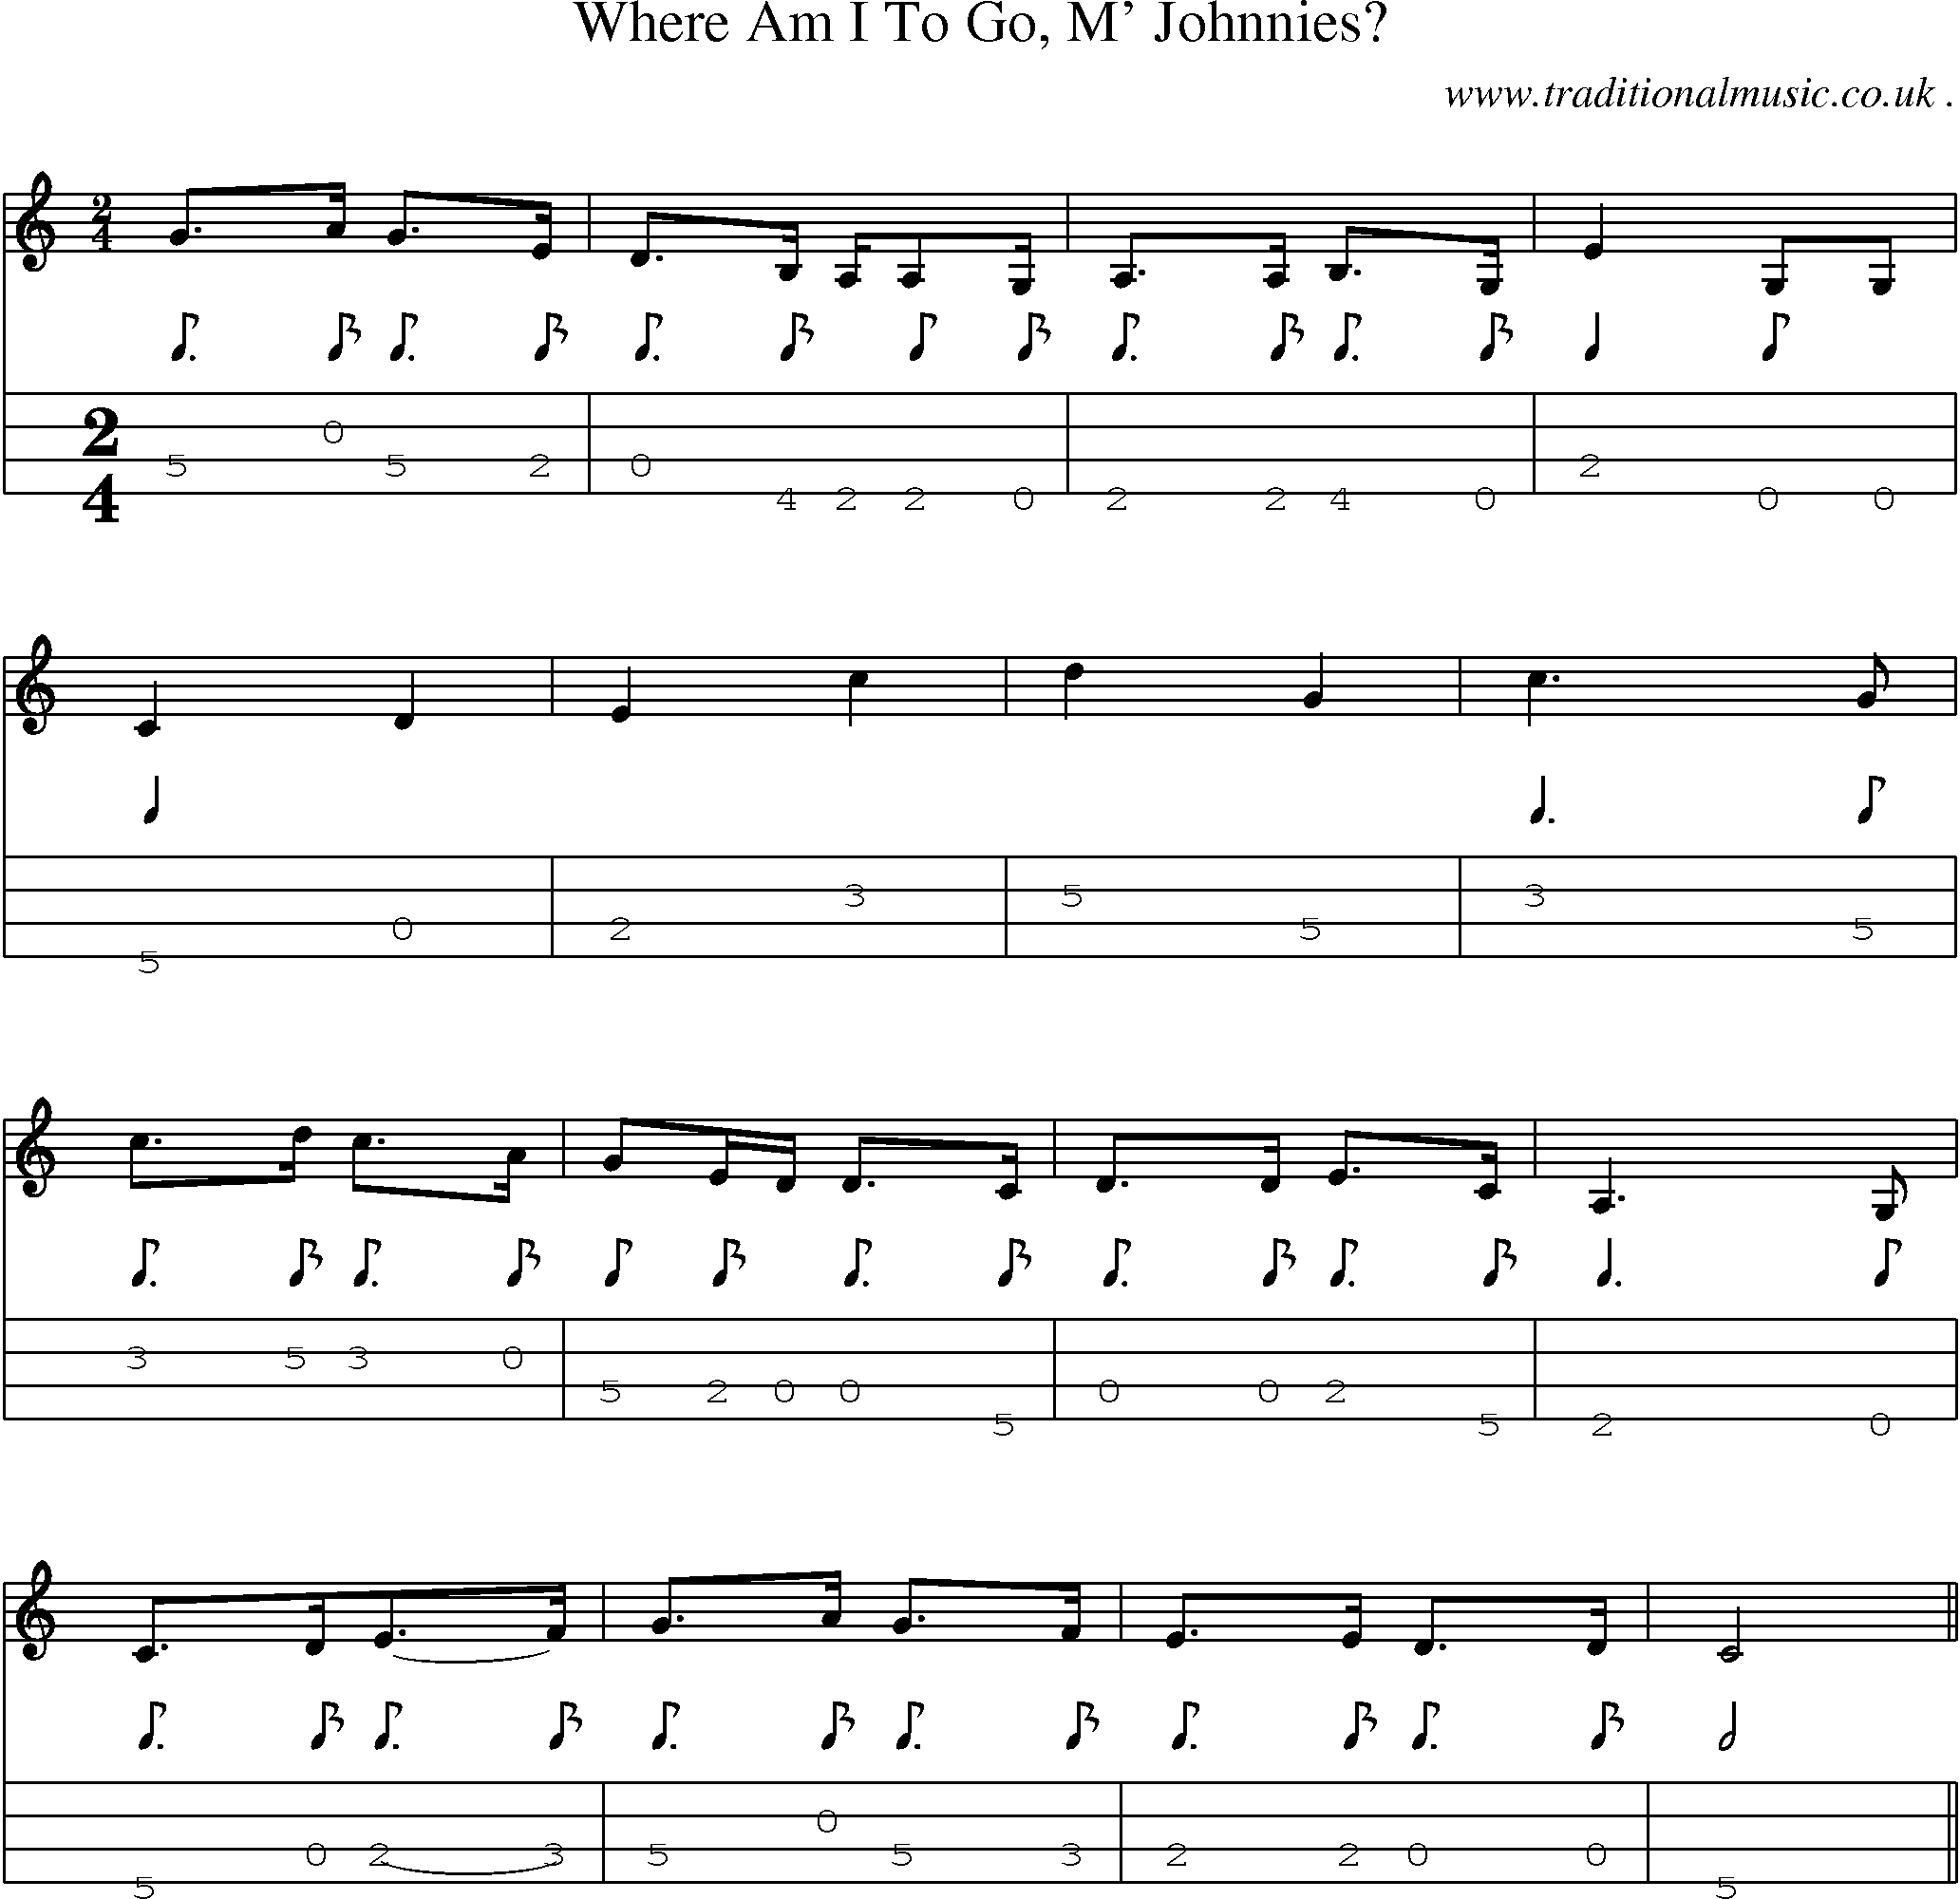 Sheet-Music and Mandolin Tabs for Where Am I To Go M Johnnies